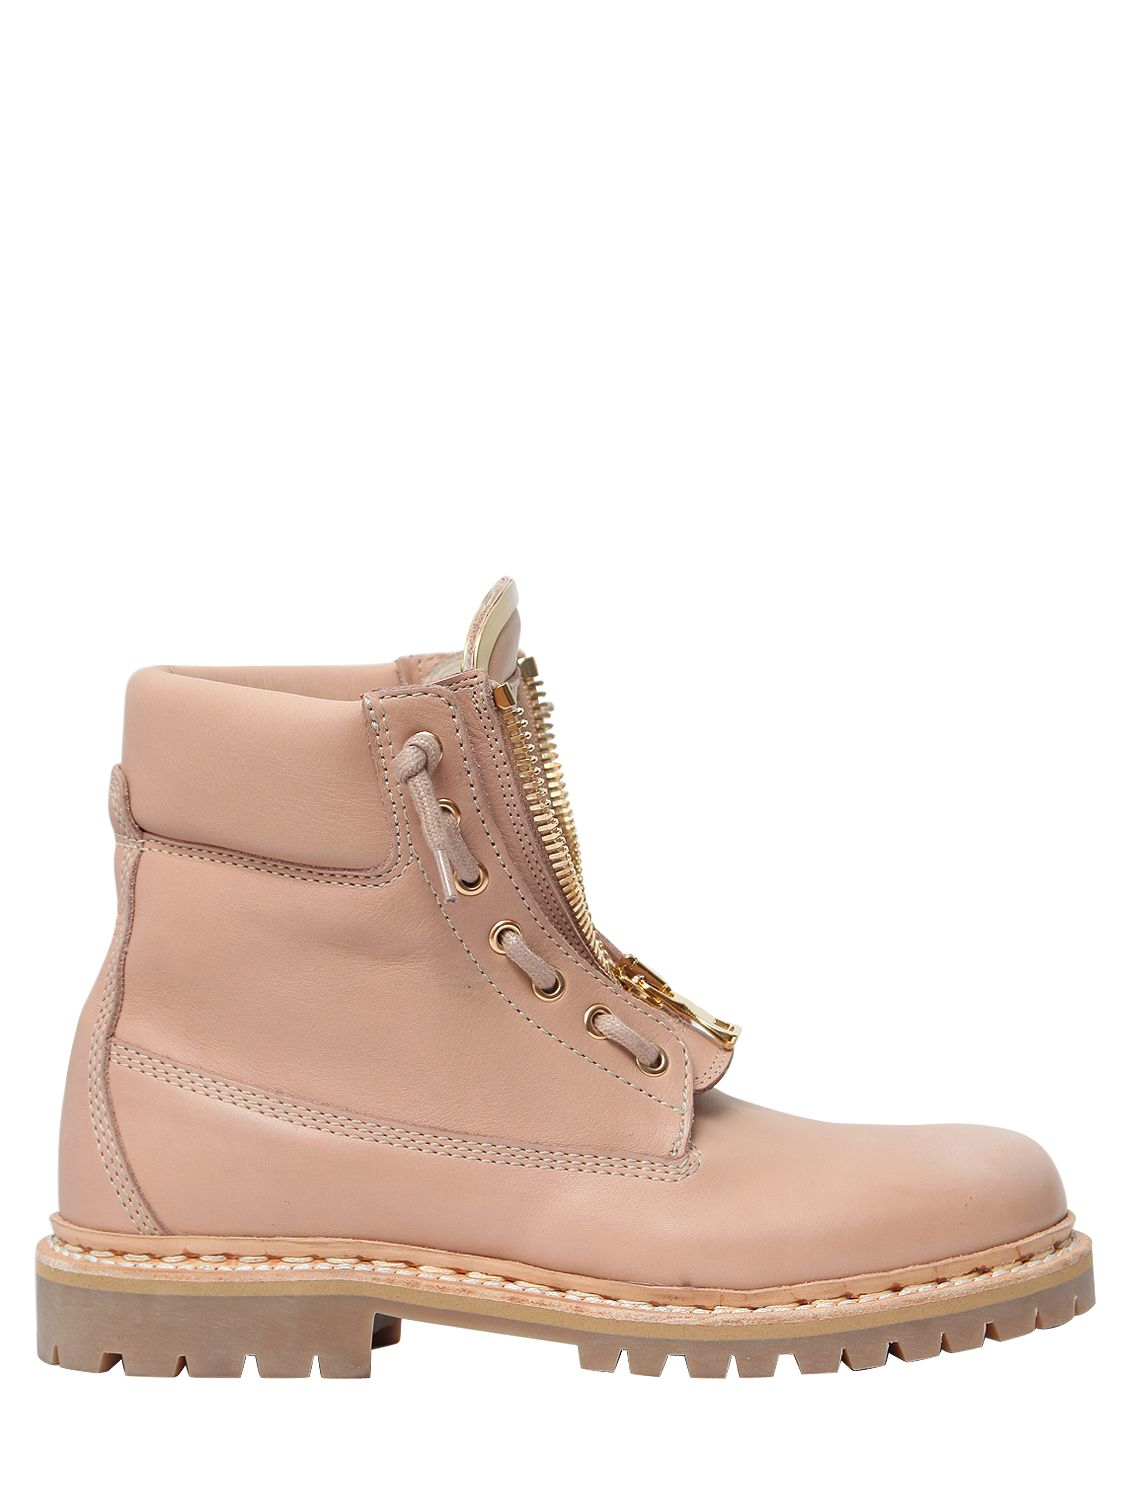 Balmain Taiga Leather Military Boots in Nude (Pink) | Lyst